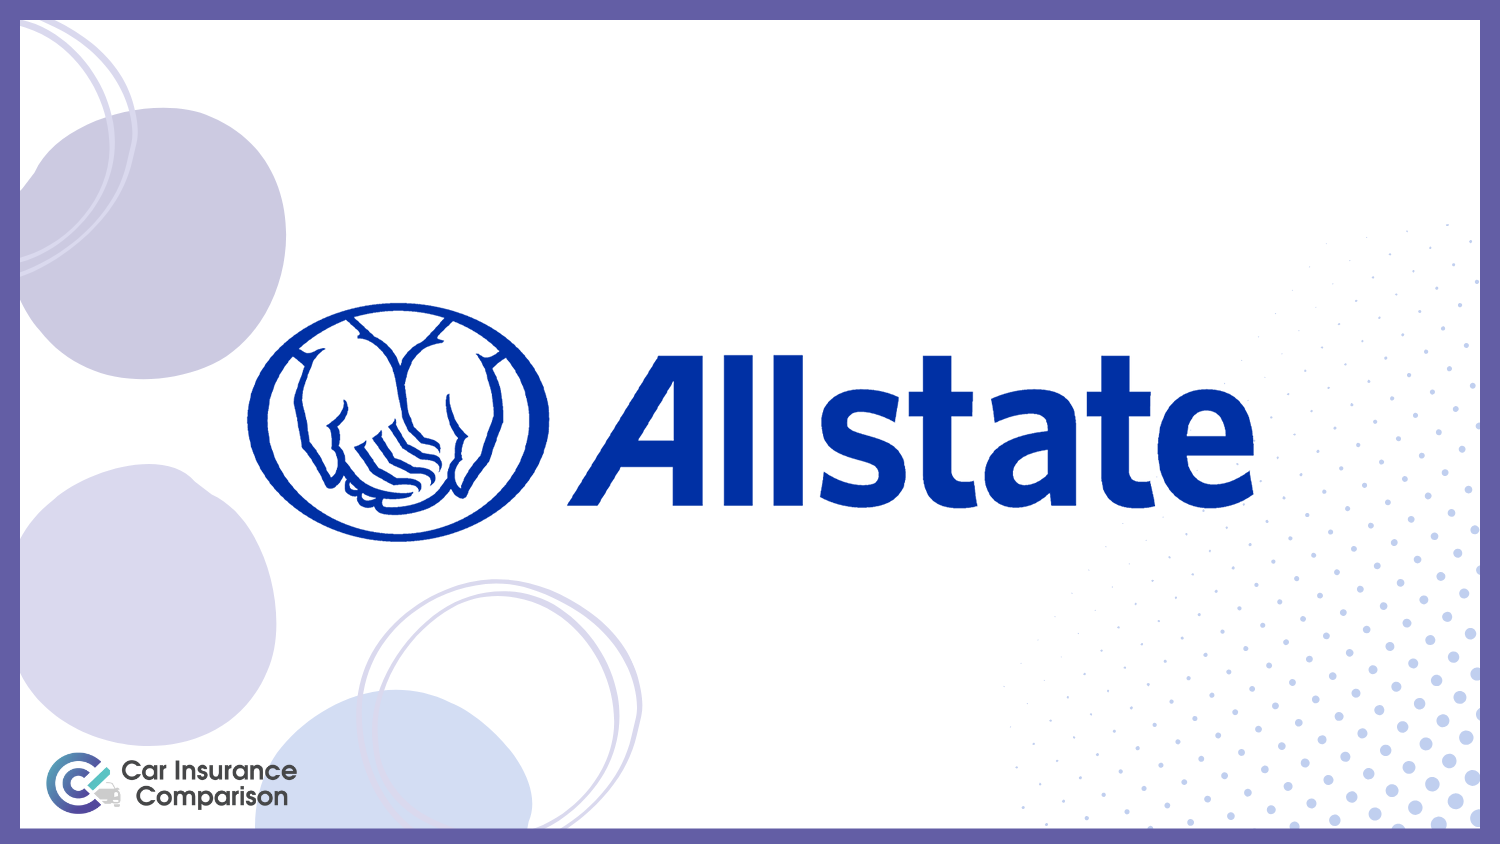 Allstate: Best Car Insurance for Inexperienced Drivers